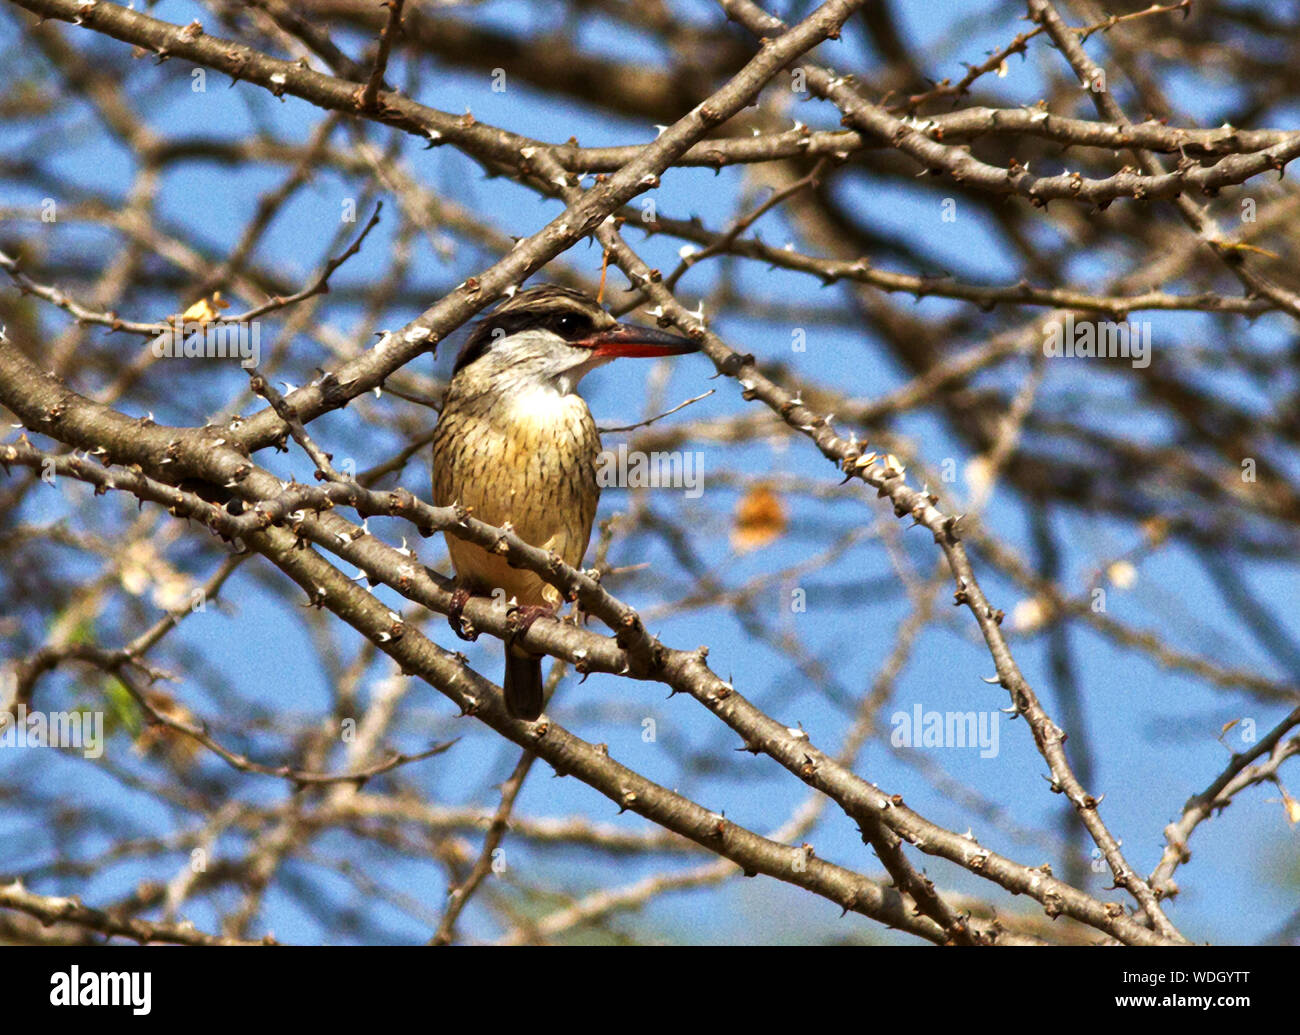 A small and dumpy Kingfisher, the Striped Kingfisher is usually encountered in open dry woodlands well away from water. Stock Photo